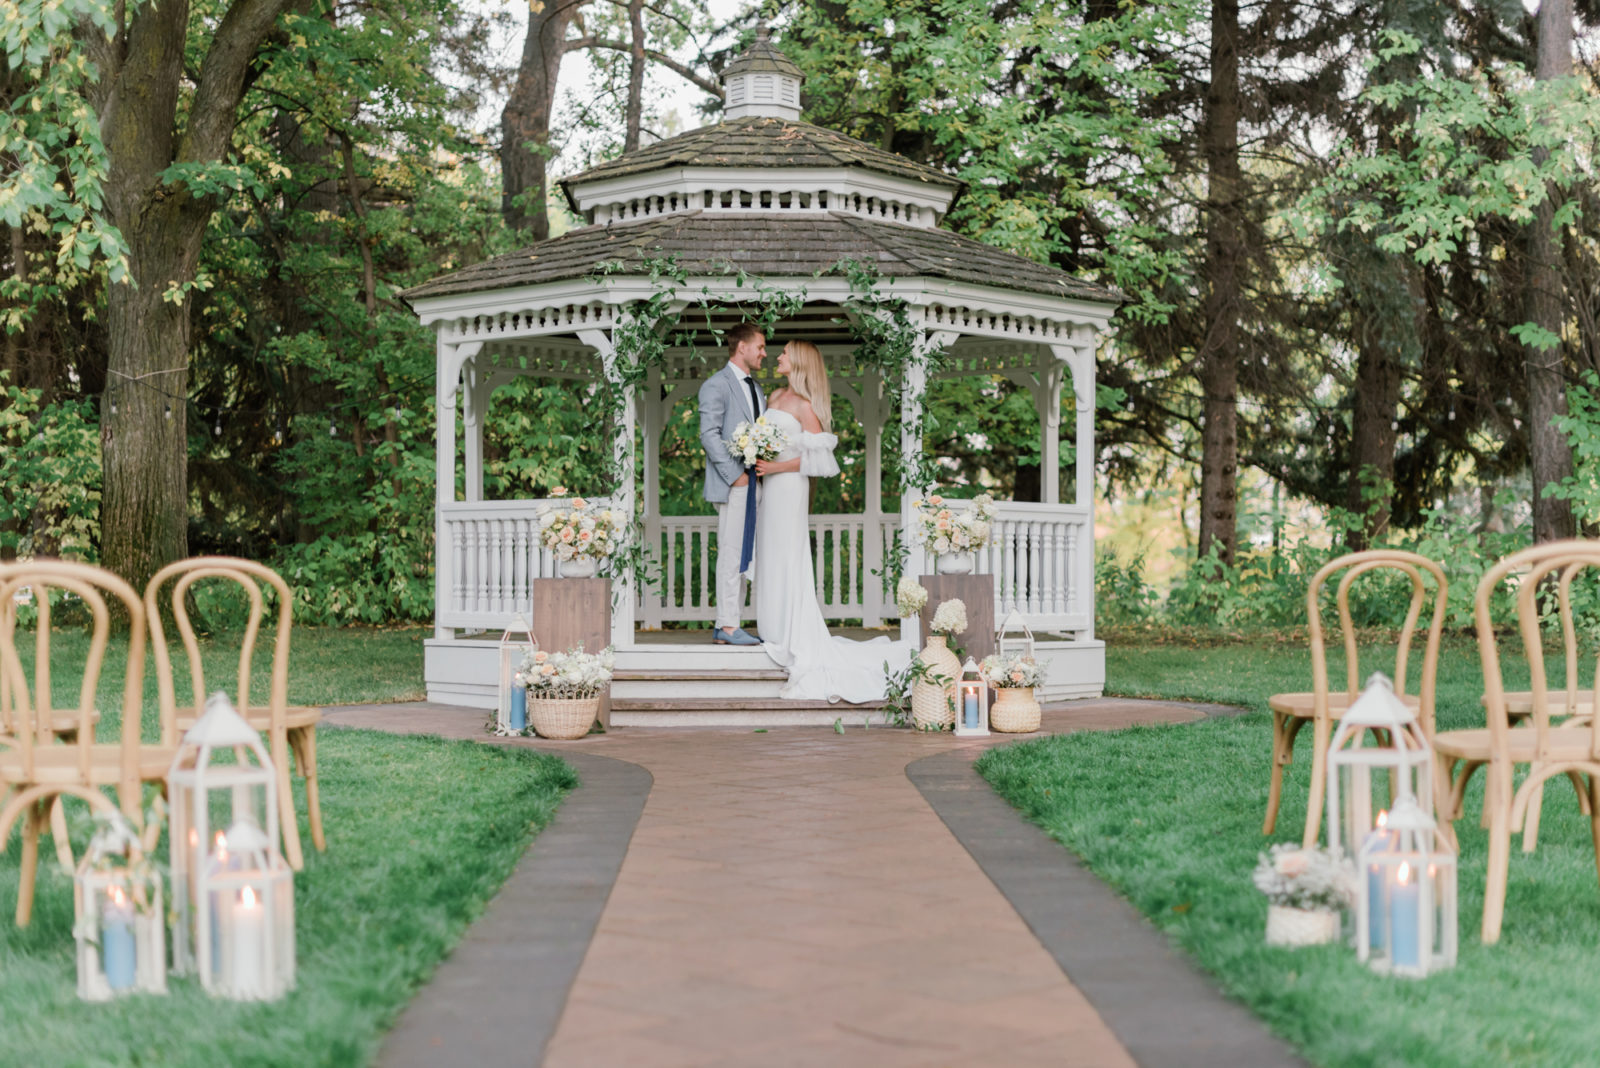 Old world inspired wedding ceremony at the gazebo at the Norland Historic Estate Venue in Lethbridge Alberta